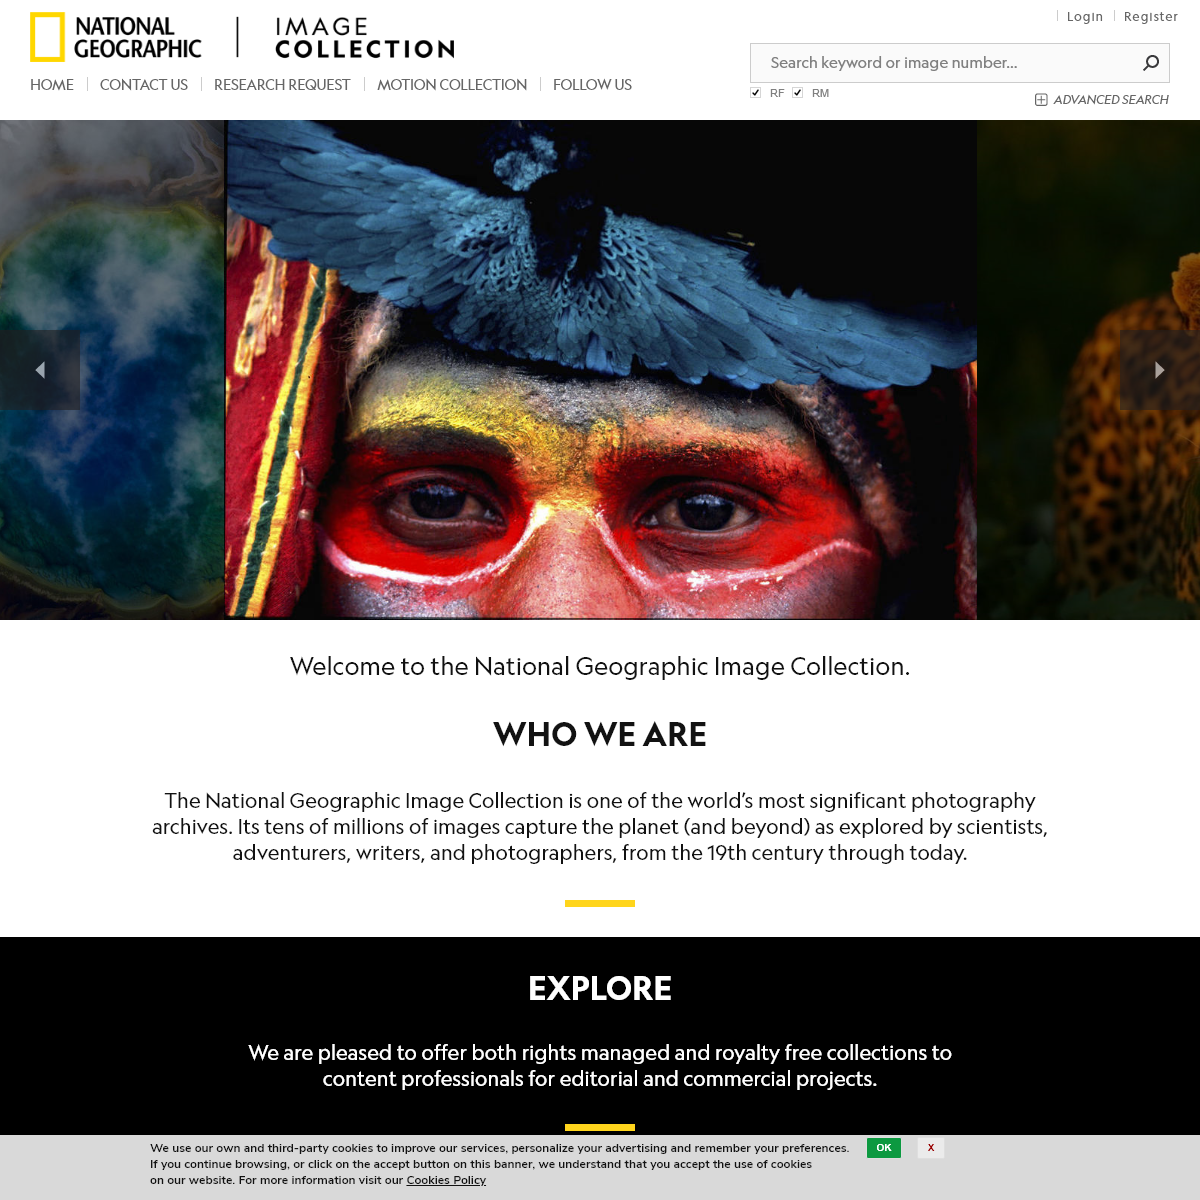 A complete backup of natgeoimagecollection.com